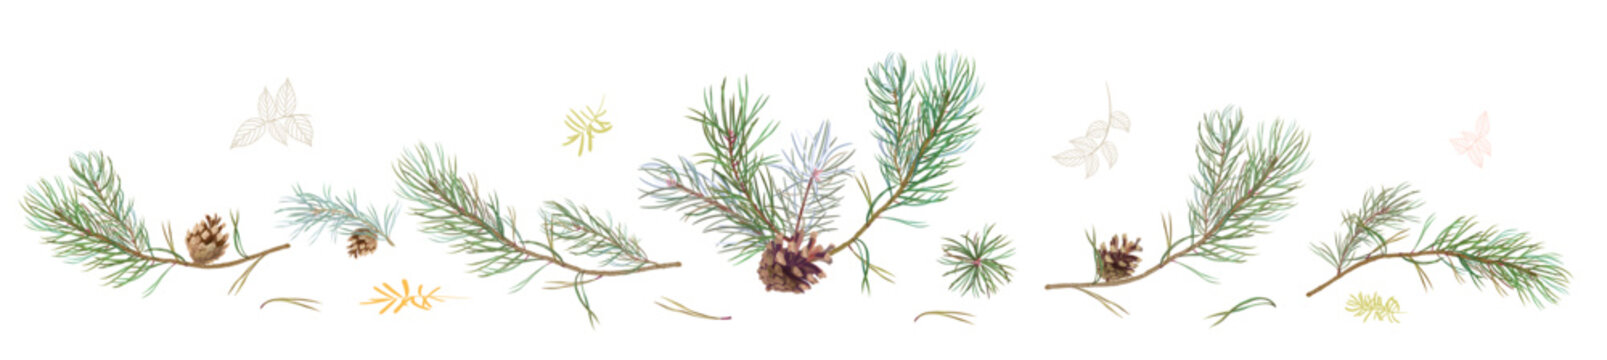 Horizontal border with pine branches and cones, needles on white background, hand digital draw, watercolor style, decorative botanical illustration for design, Christmas tree, vector